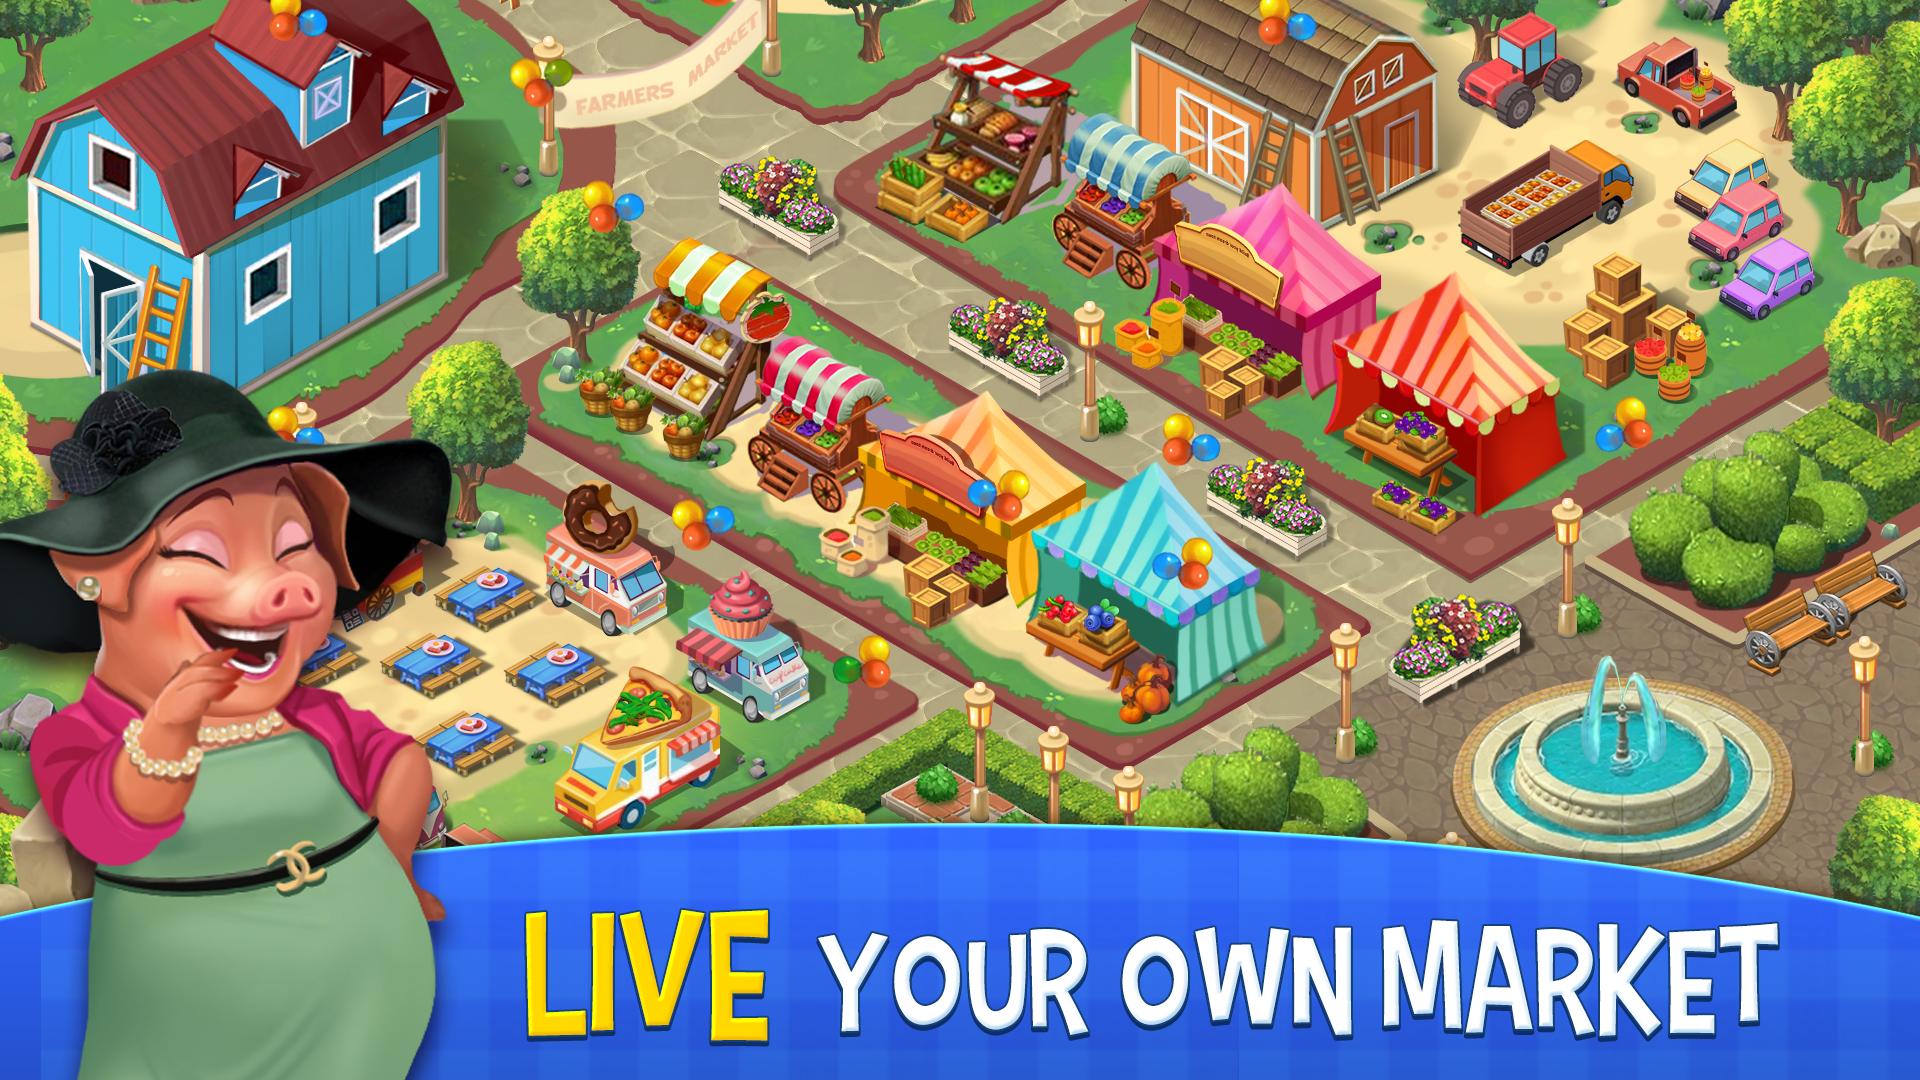 TOWNTOPIA - Play Online for Free!